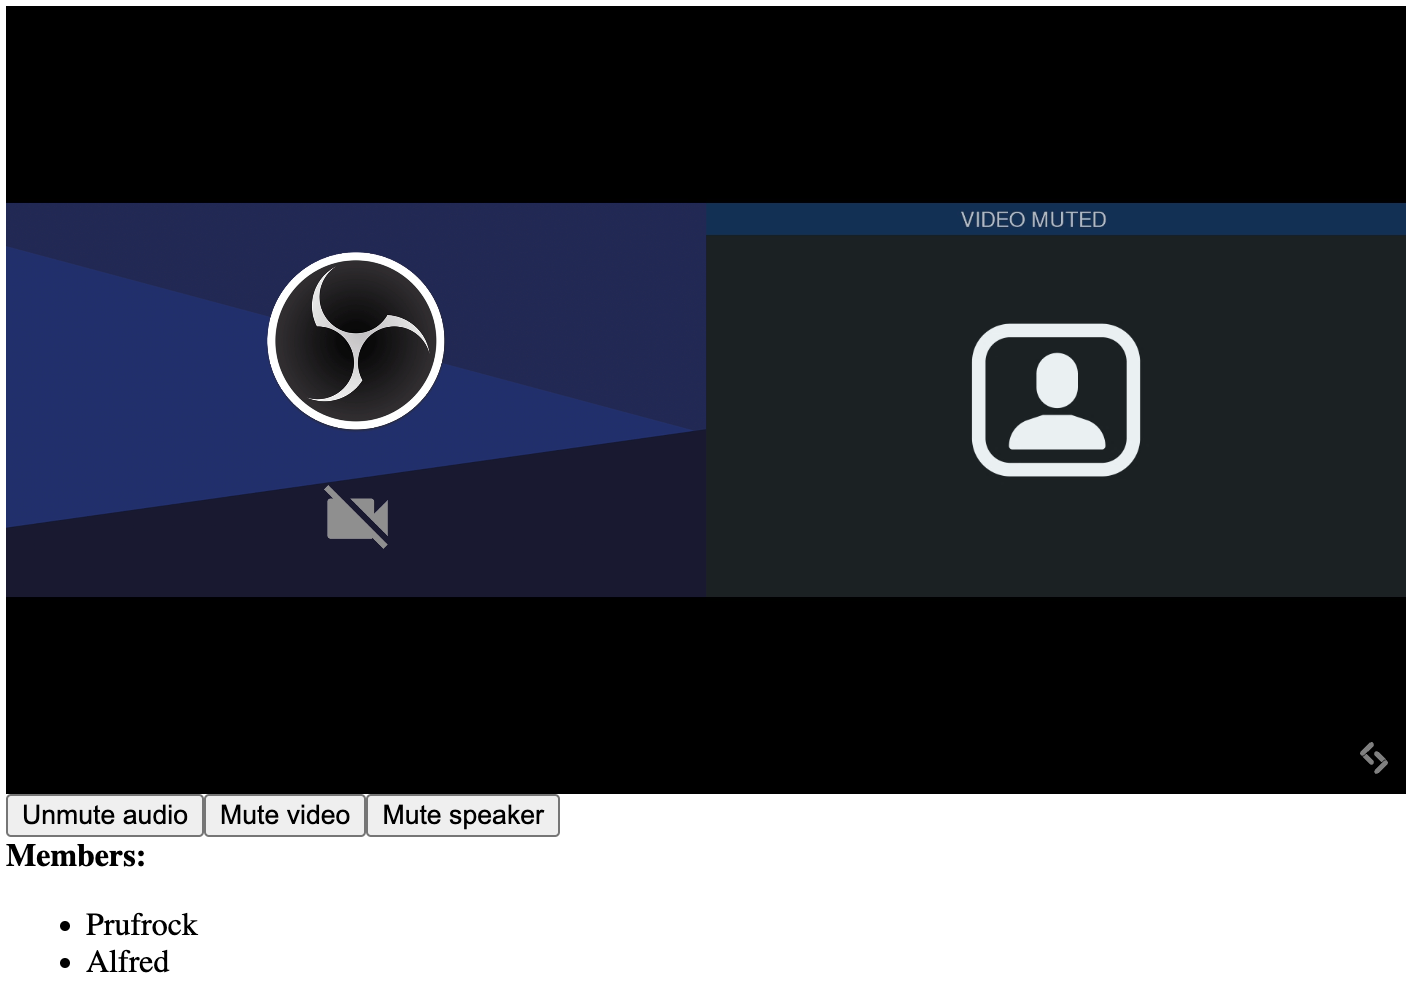 A screenshot of the Video Conference element. There are two participants in the conference. Beneath the video, buttons allow the user to control audio, video, and speaker. There is also a list of conference members.